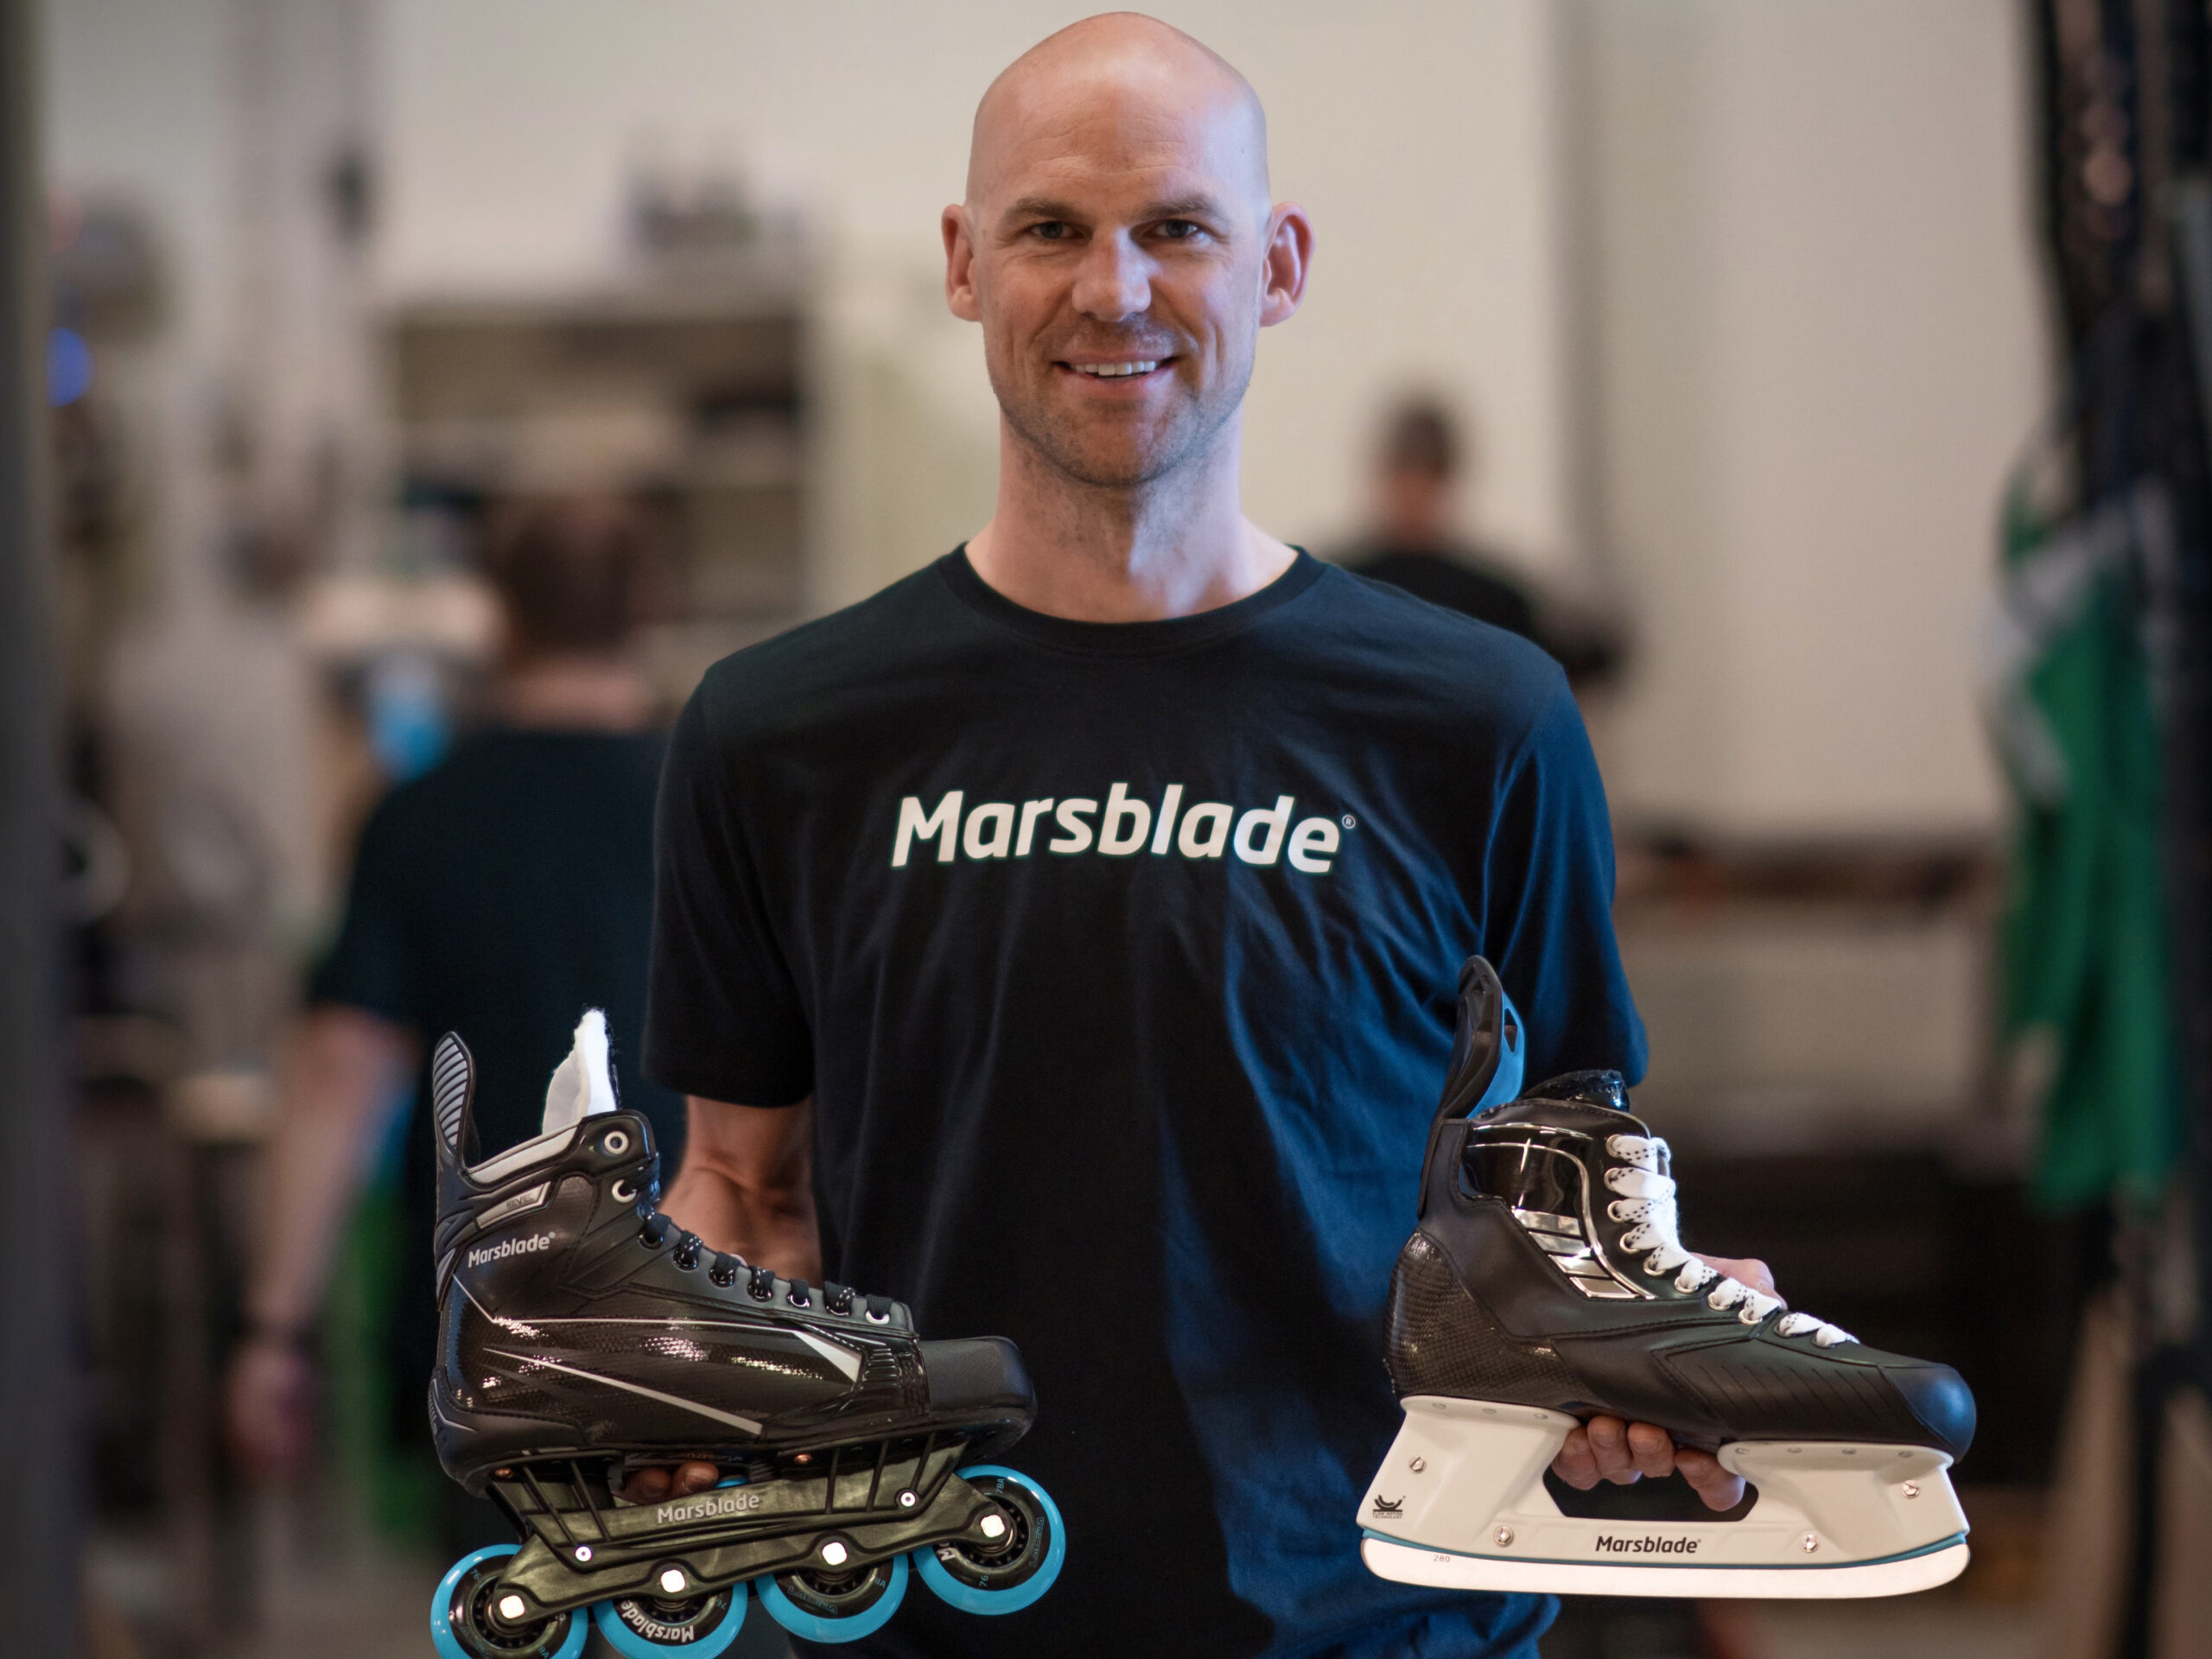 Founder and inventor Per Mårs with the Marsblade O1 and I1 skates.